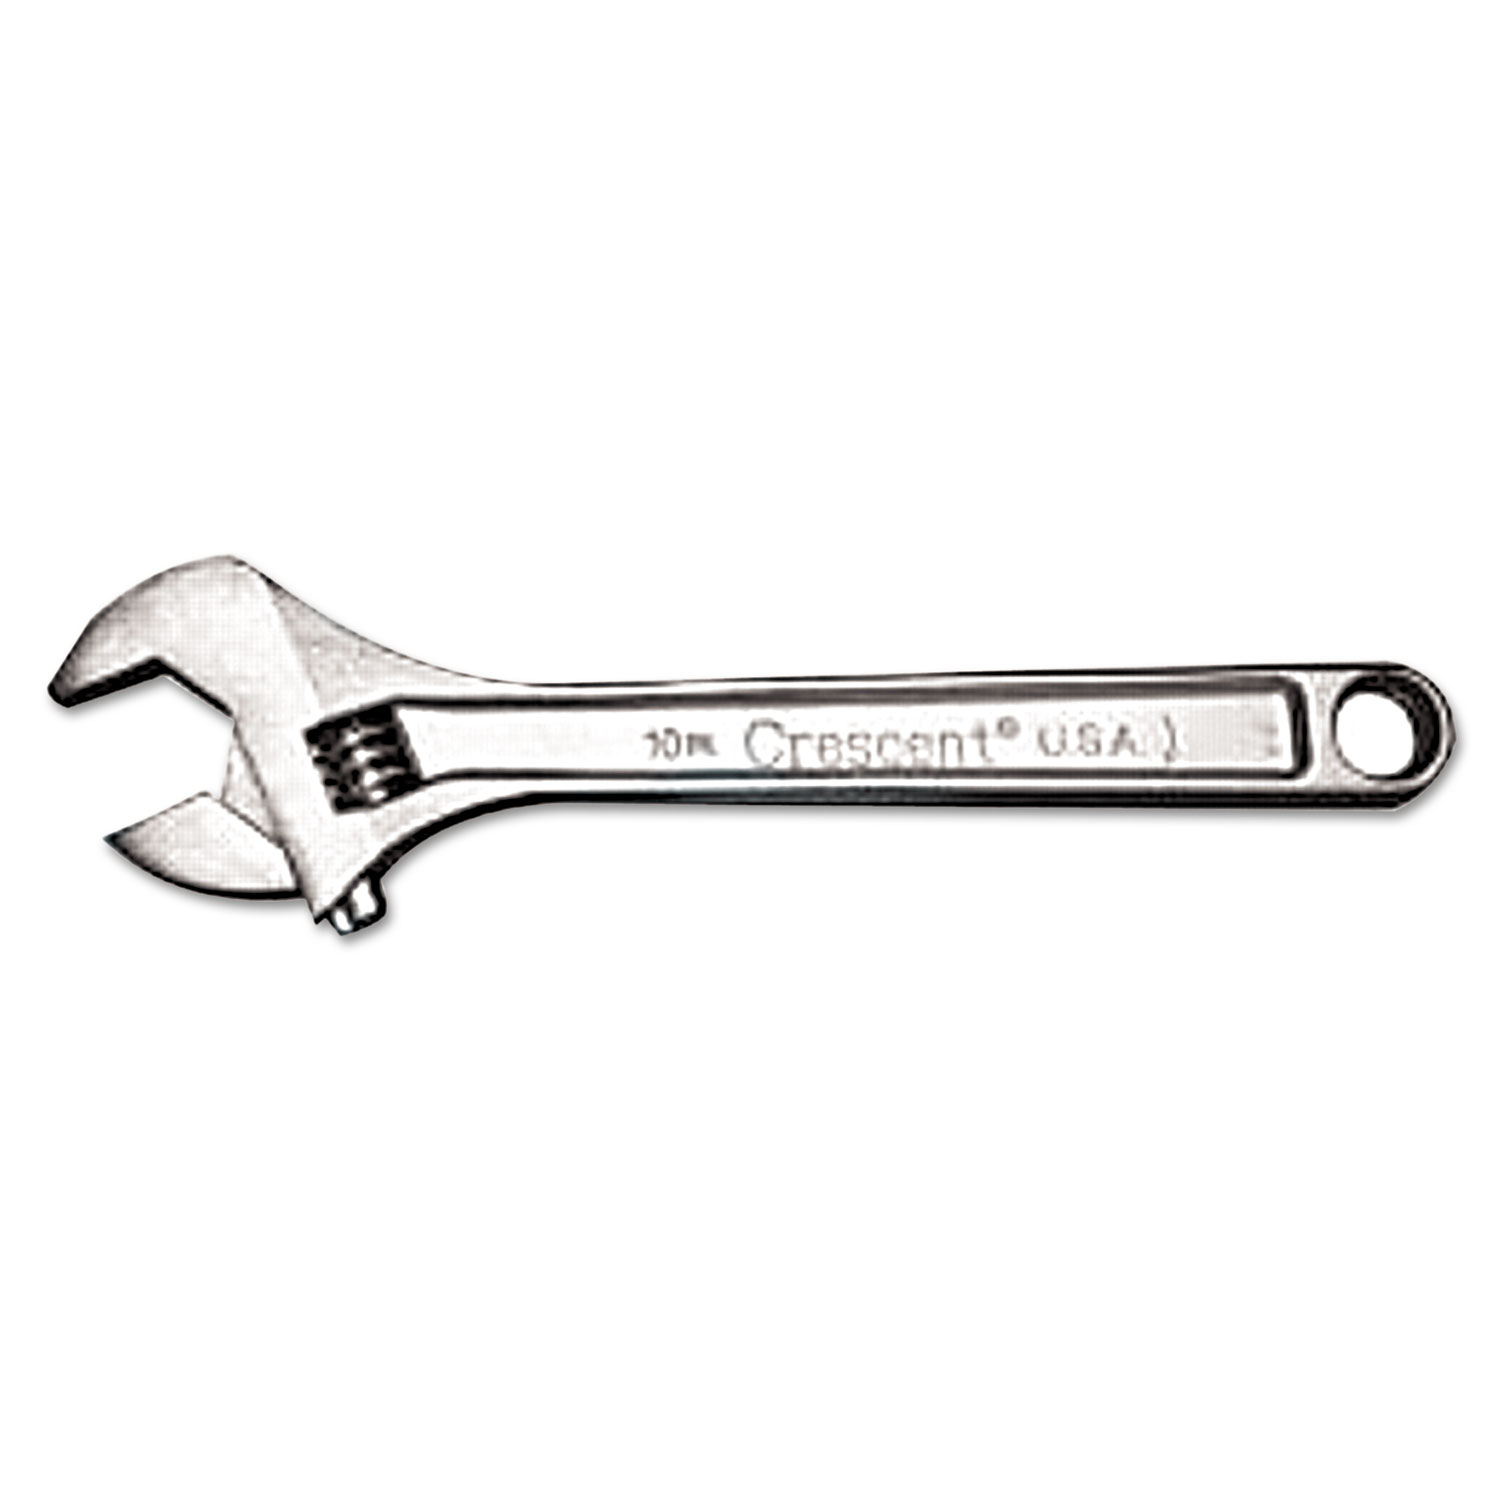 Crescent Adjustable Wrench, 10 Long, 1 5/16 Opening, Chrome